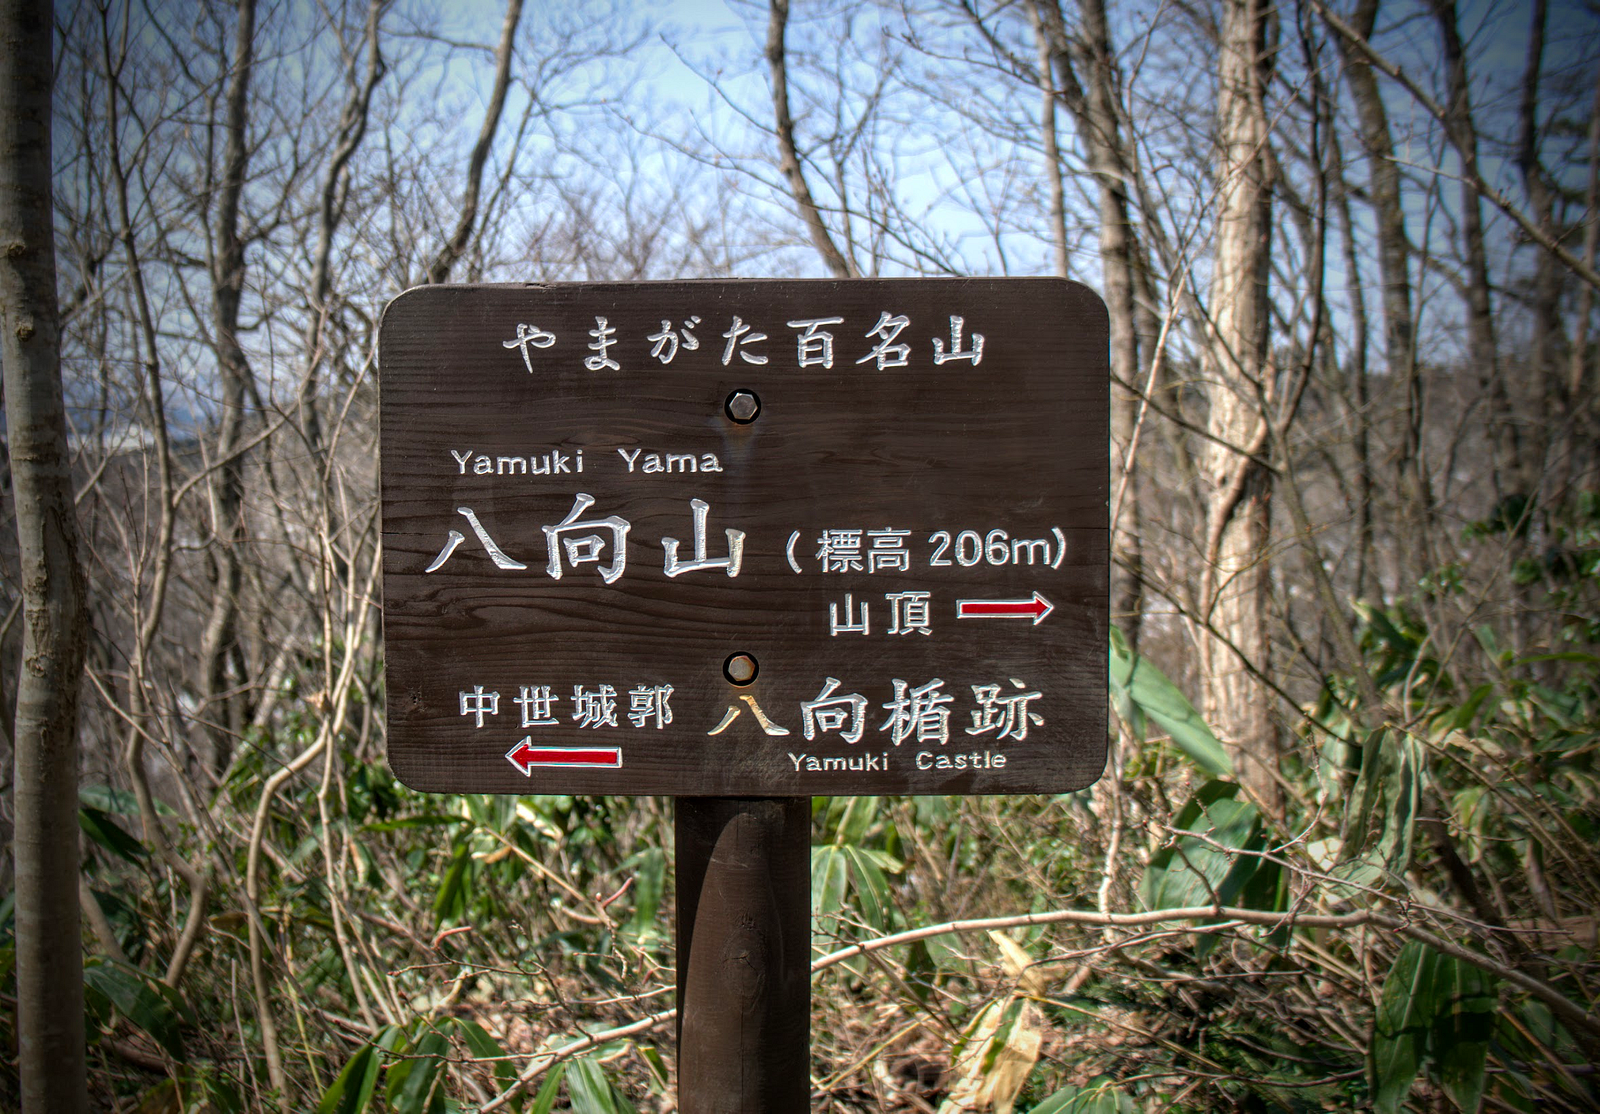 Sign at the junction of the trail up Mt. Yamuki saying ‘100 Famous Mountains of Yamagata’ and pointing in the direction of the ruins of the Yamuki castle, and the summit of Mt. Yamuki.